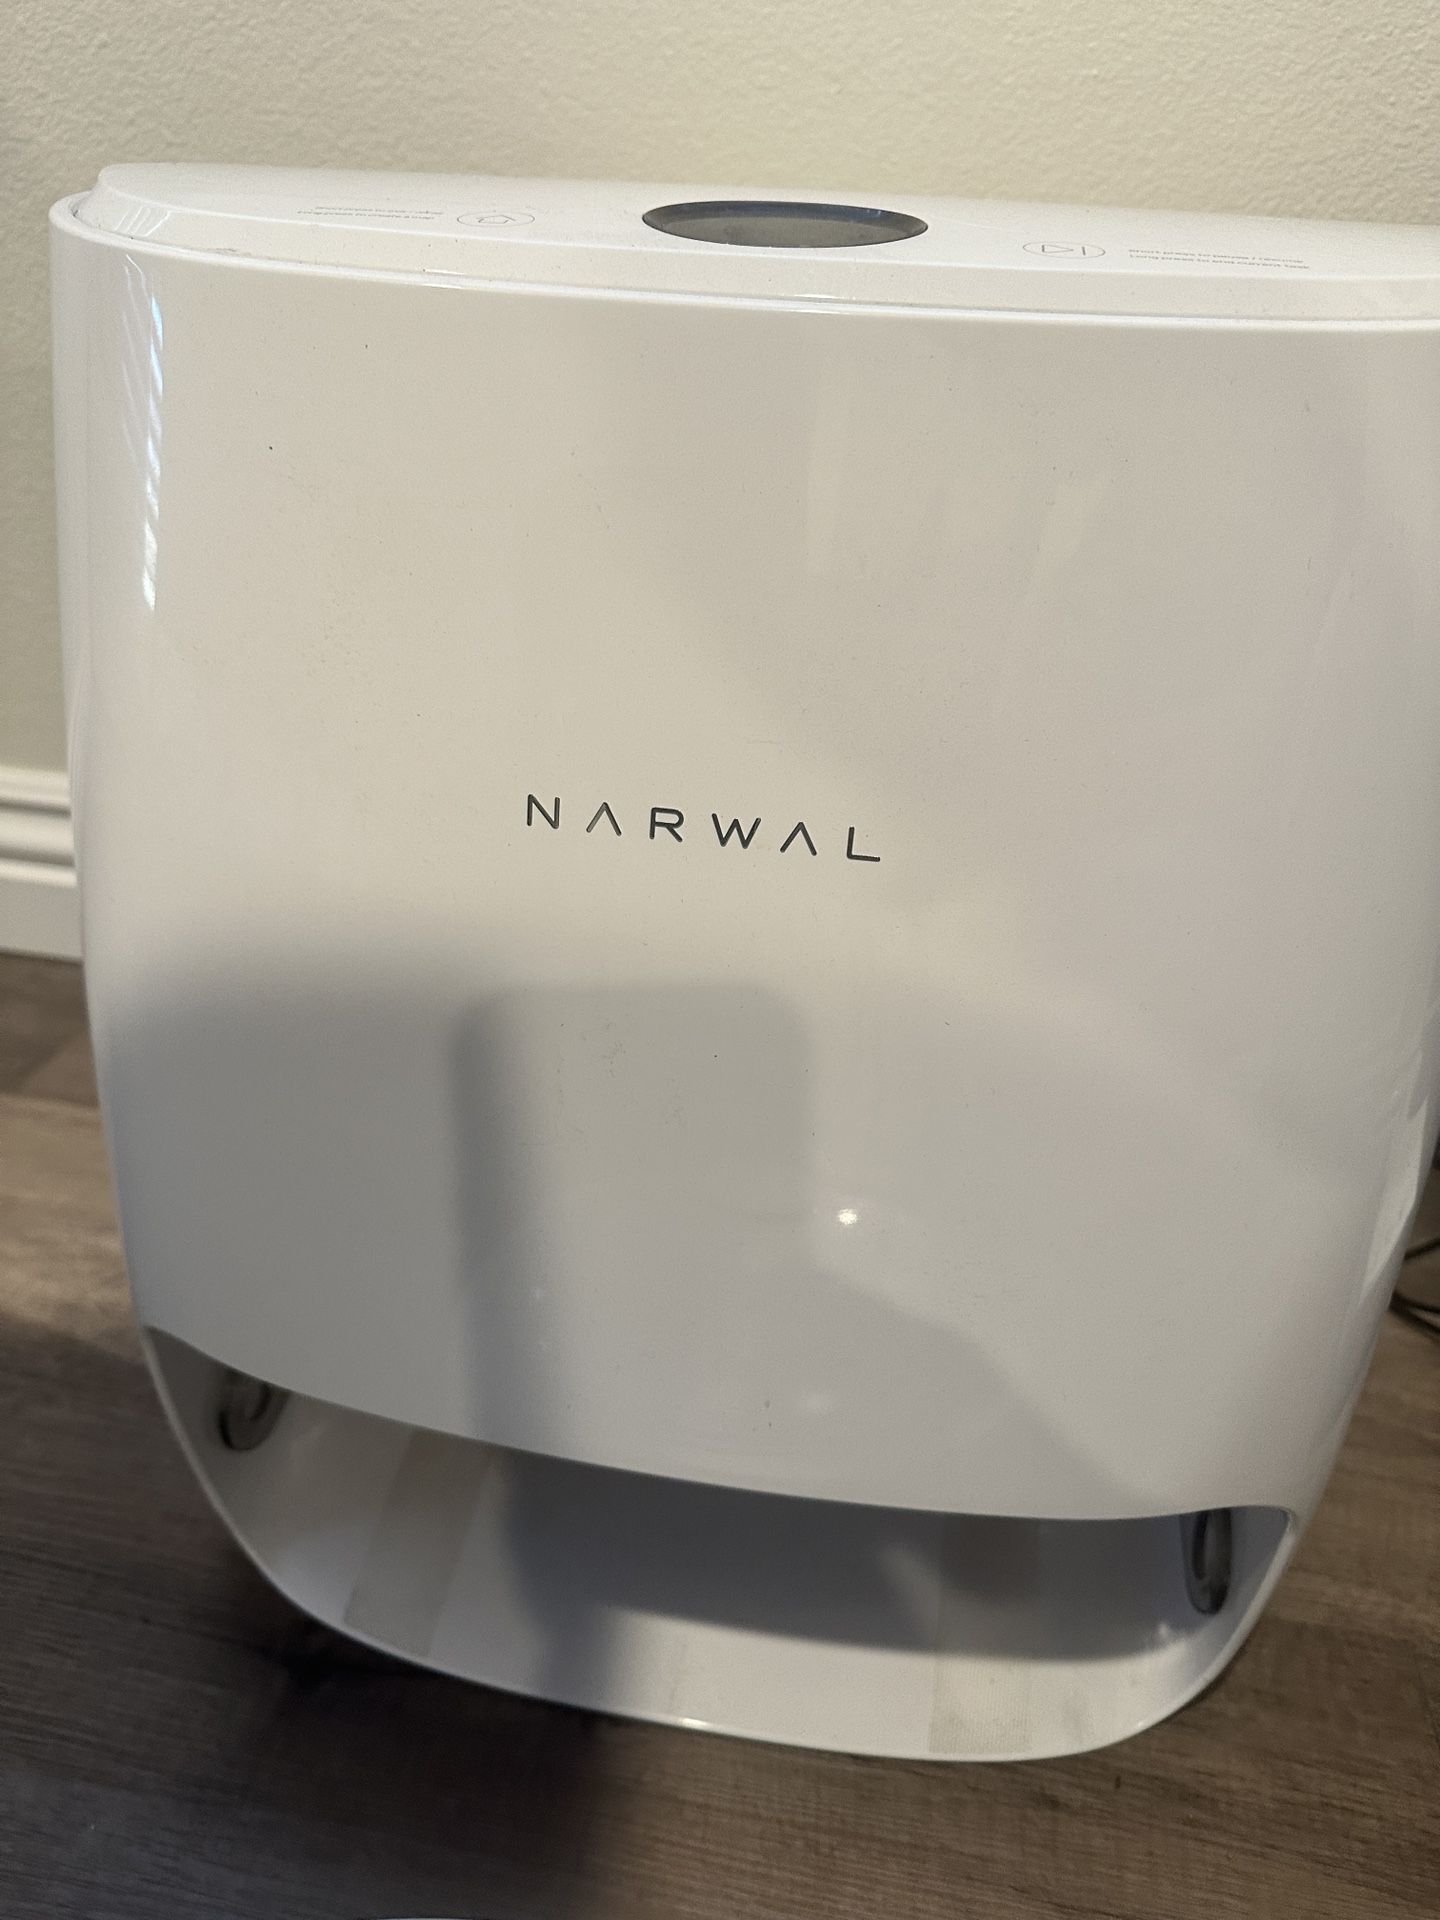 Narwhal robot vacuum 